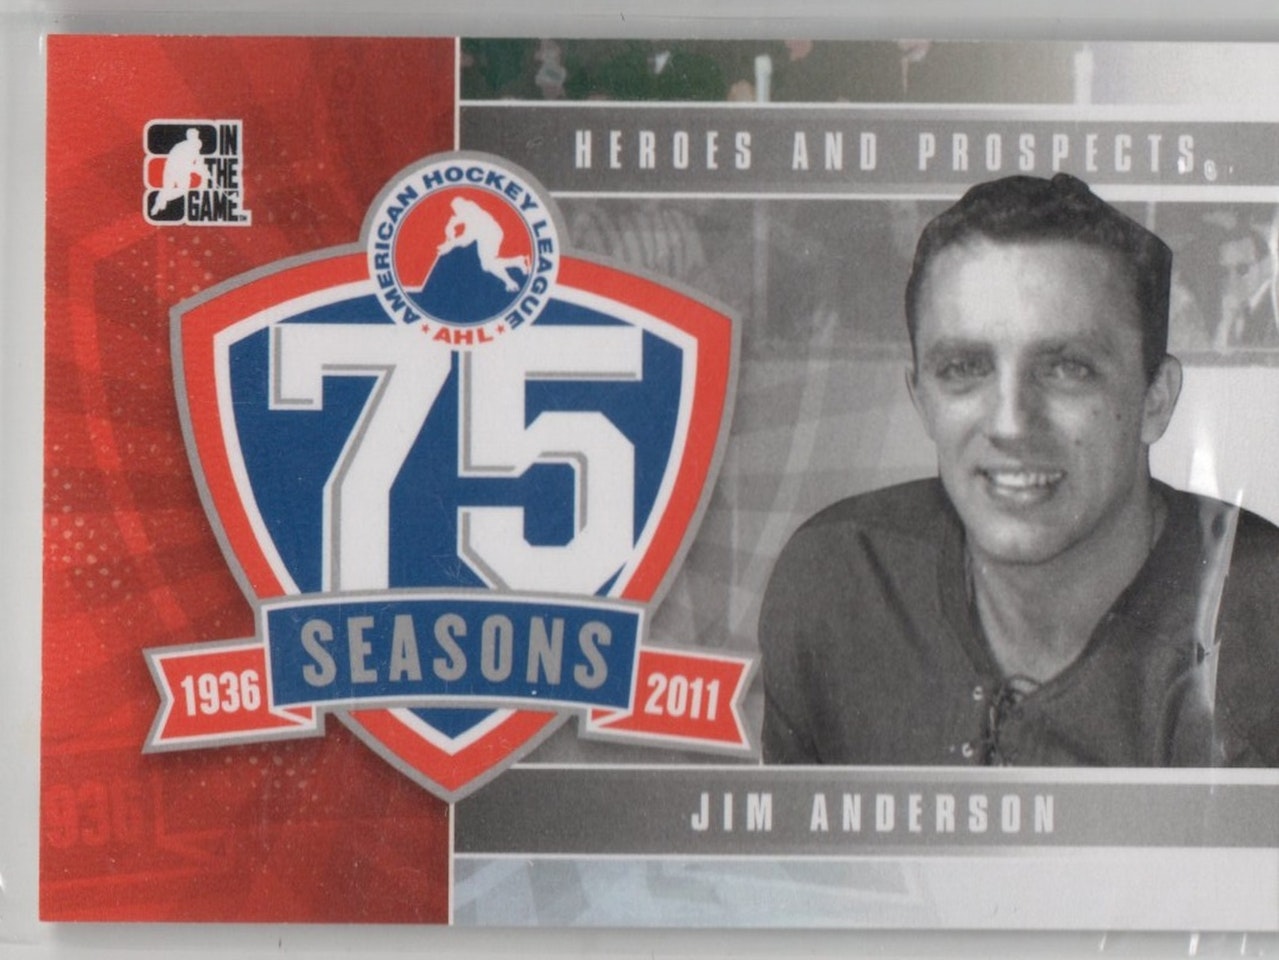 2010-11 ITG Heroes and Prospects AHL 75th Anniversary #AHLA14 Jim Anderson (10-X339-AHL)